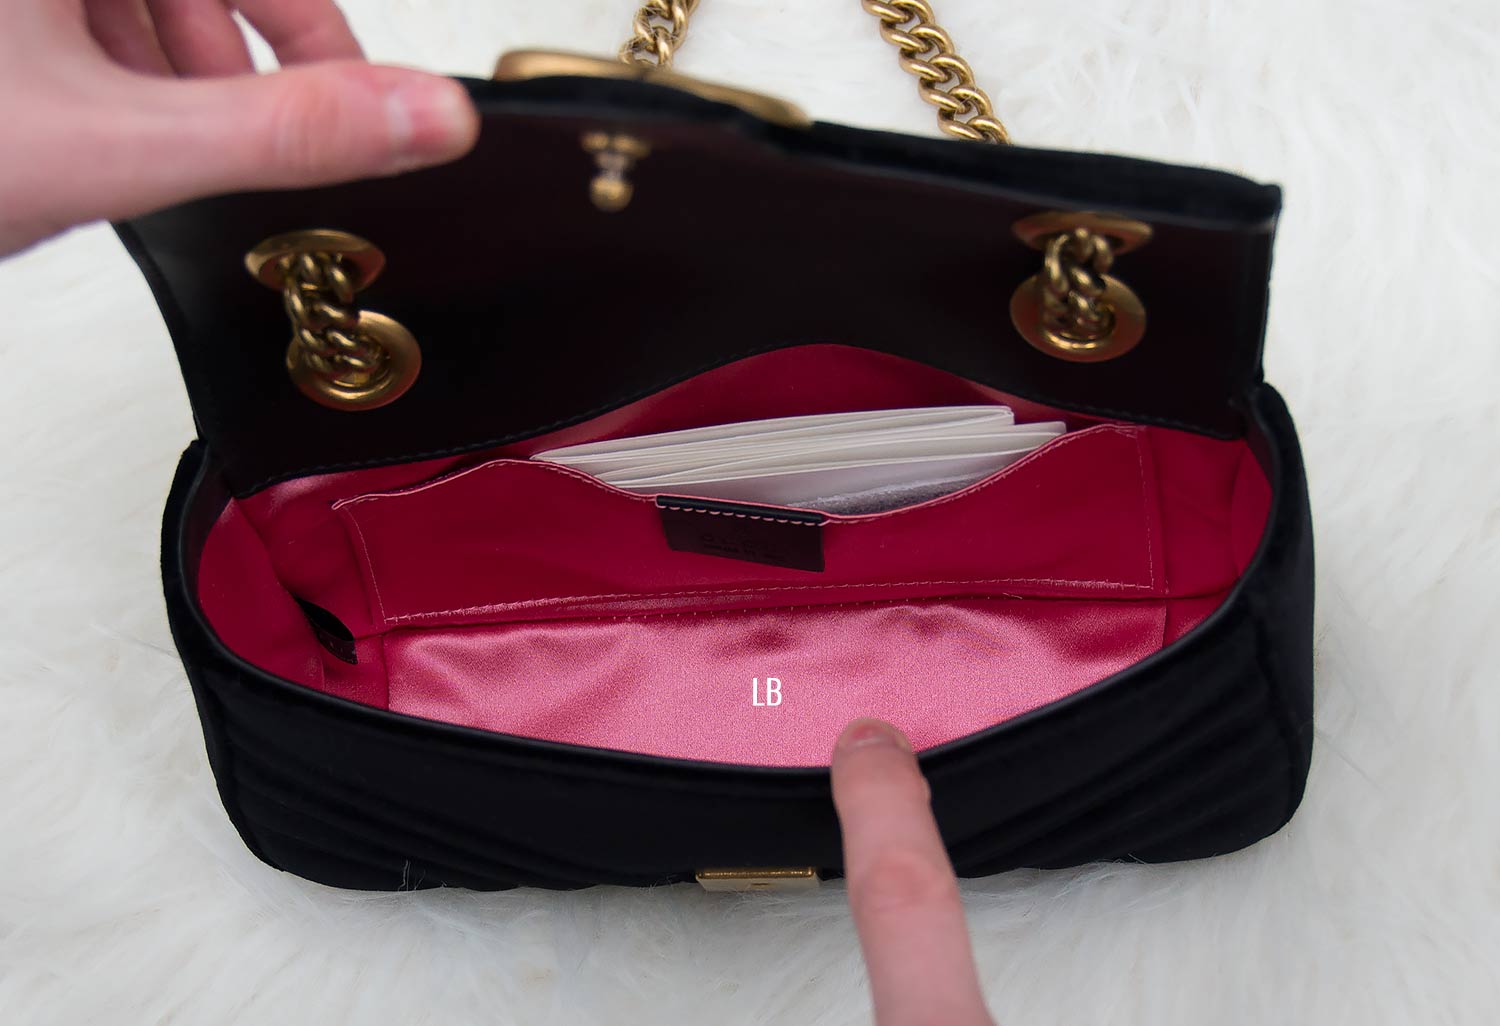 What Fits Inside the Gucci Small Marmont Bag?